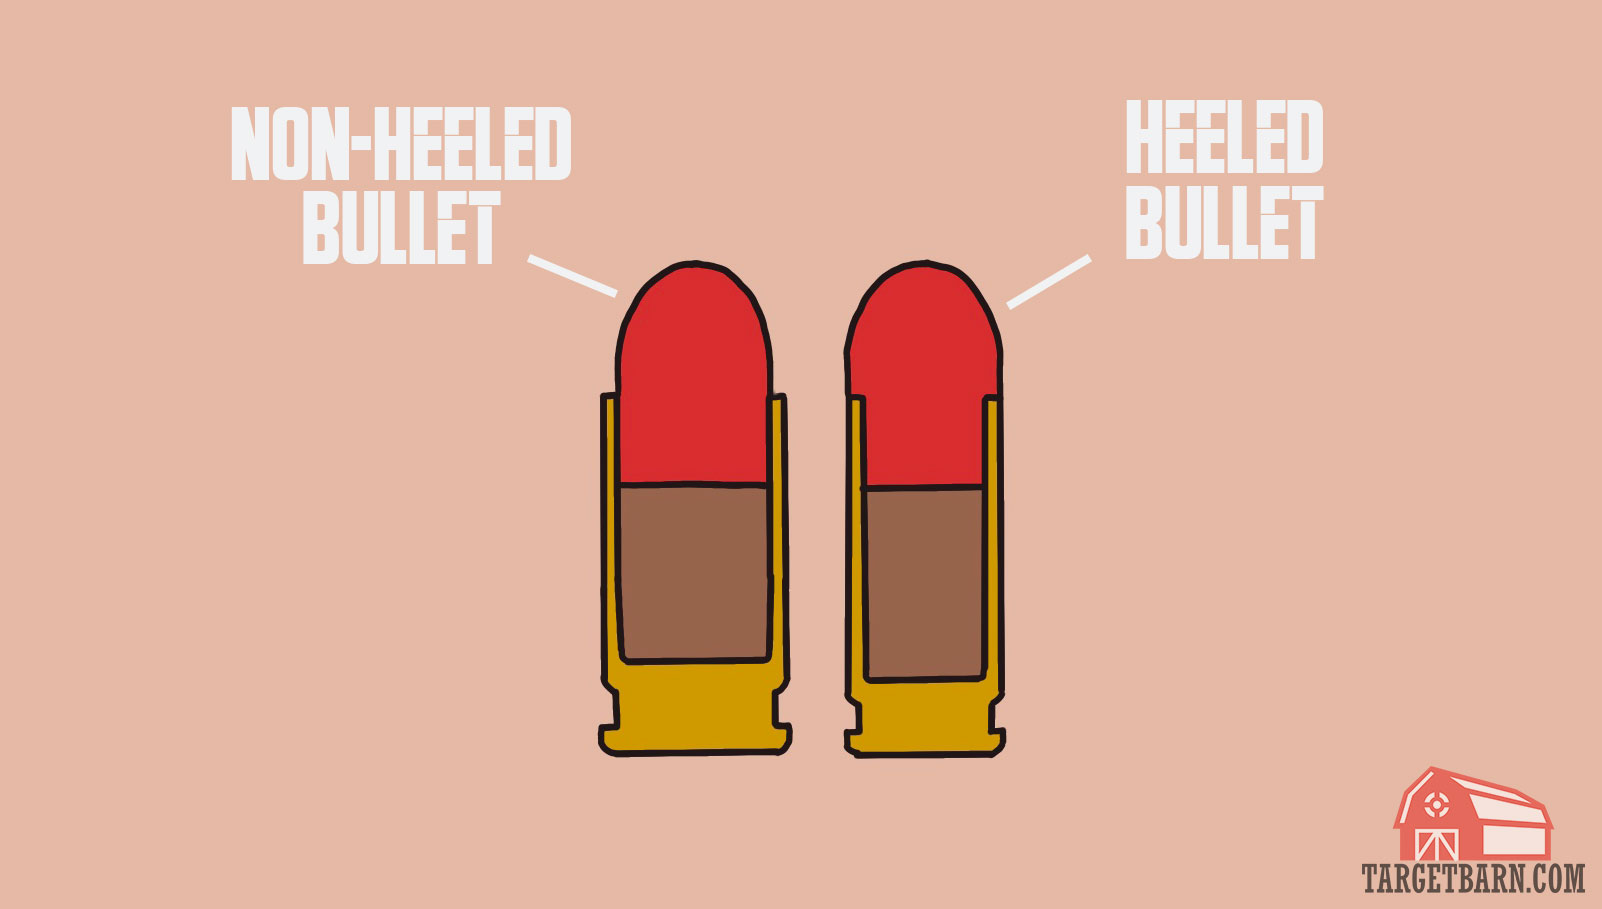 a graphic showing the design of non-heeled bullets and heeled bullets